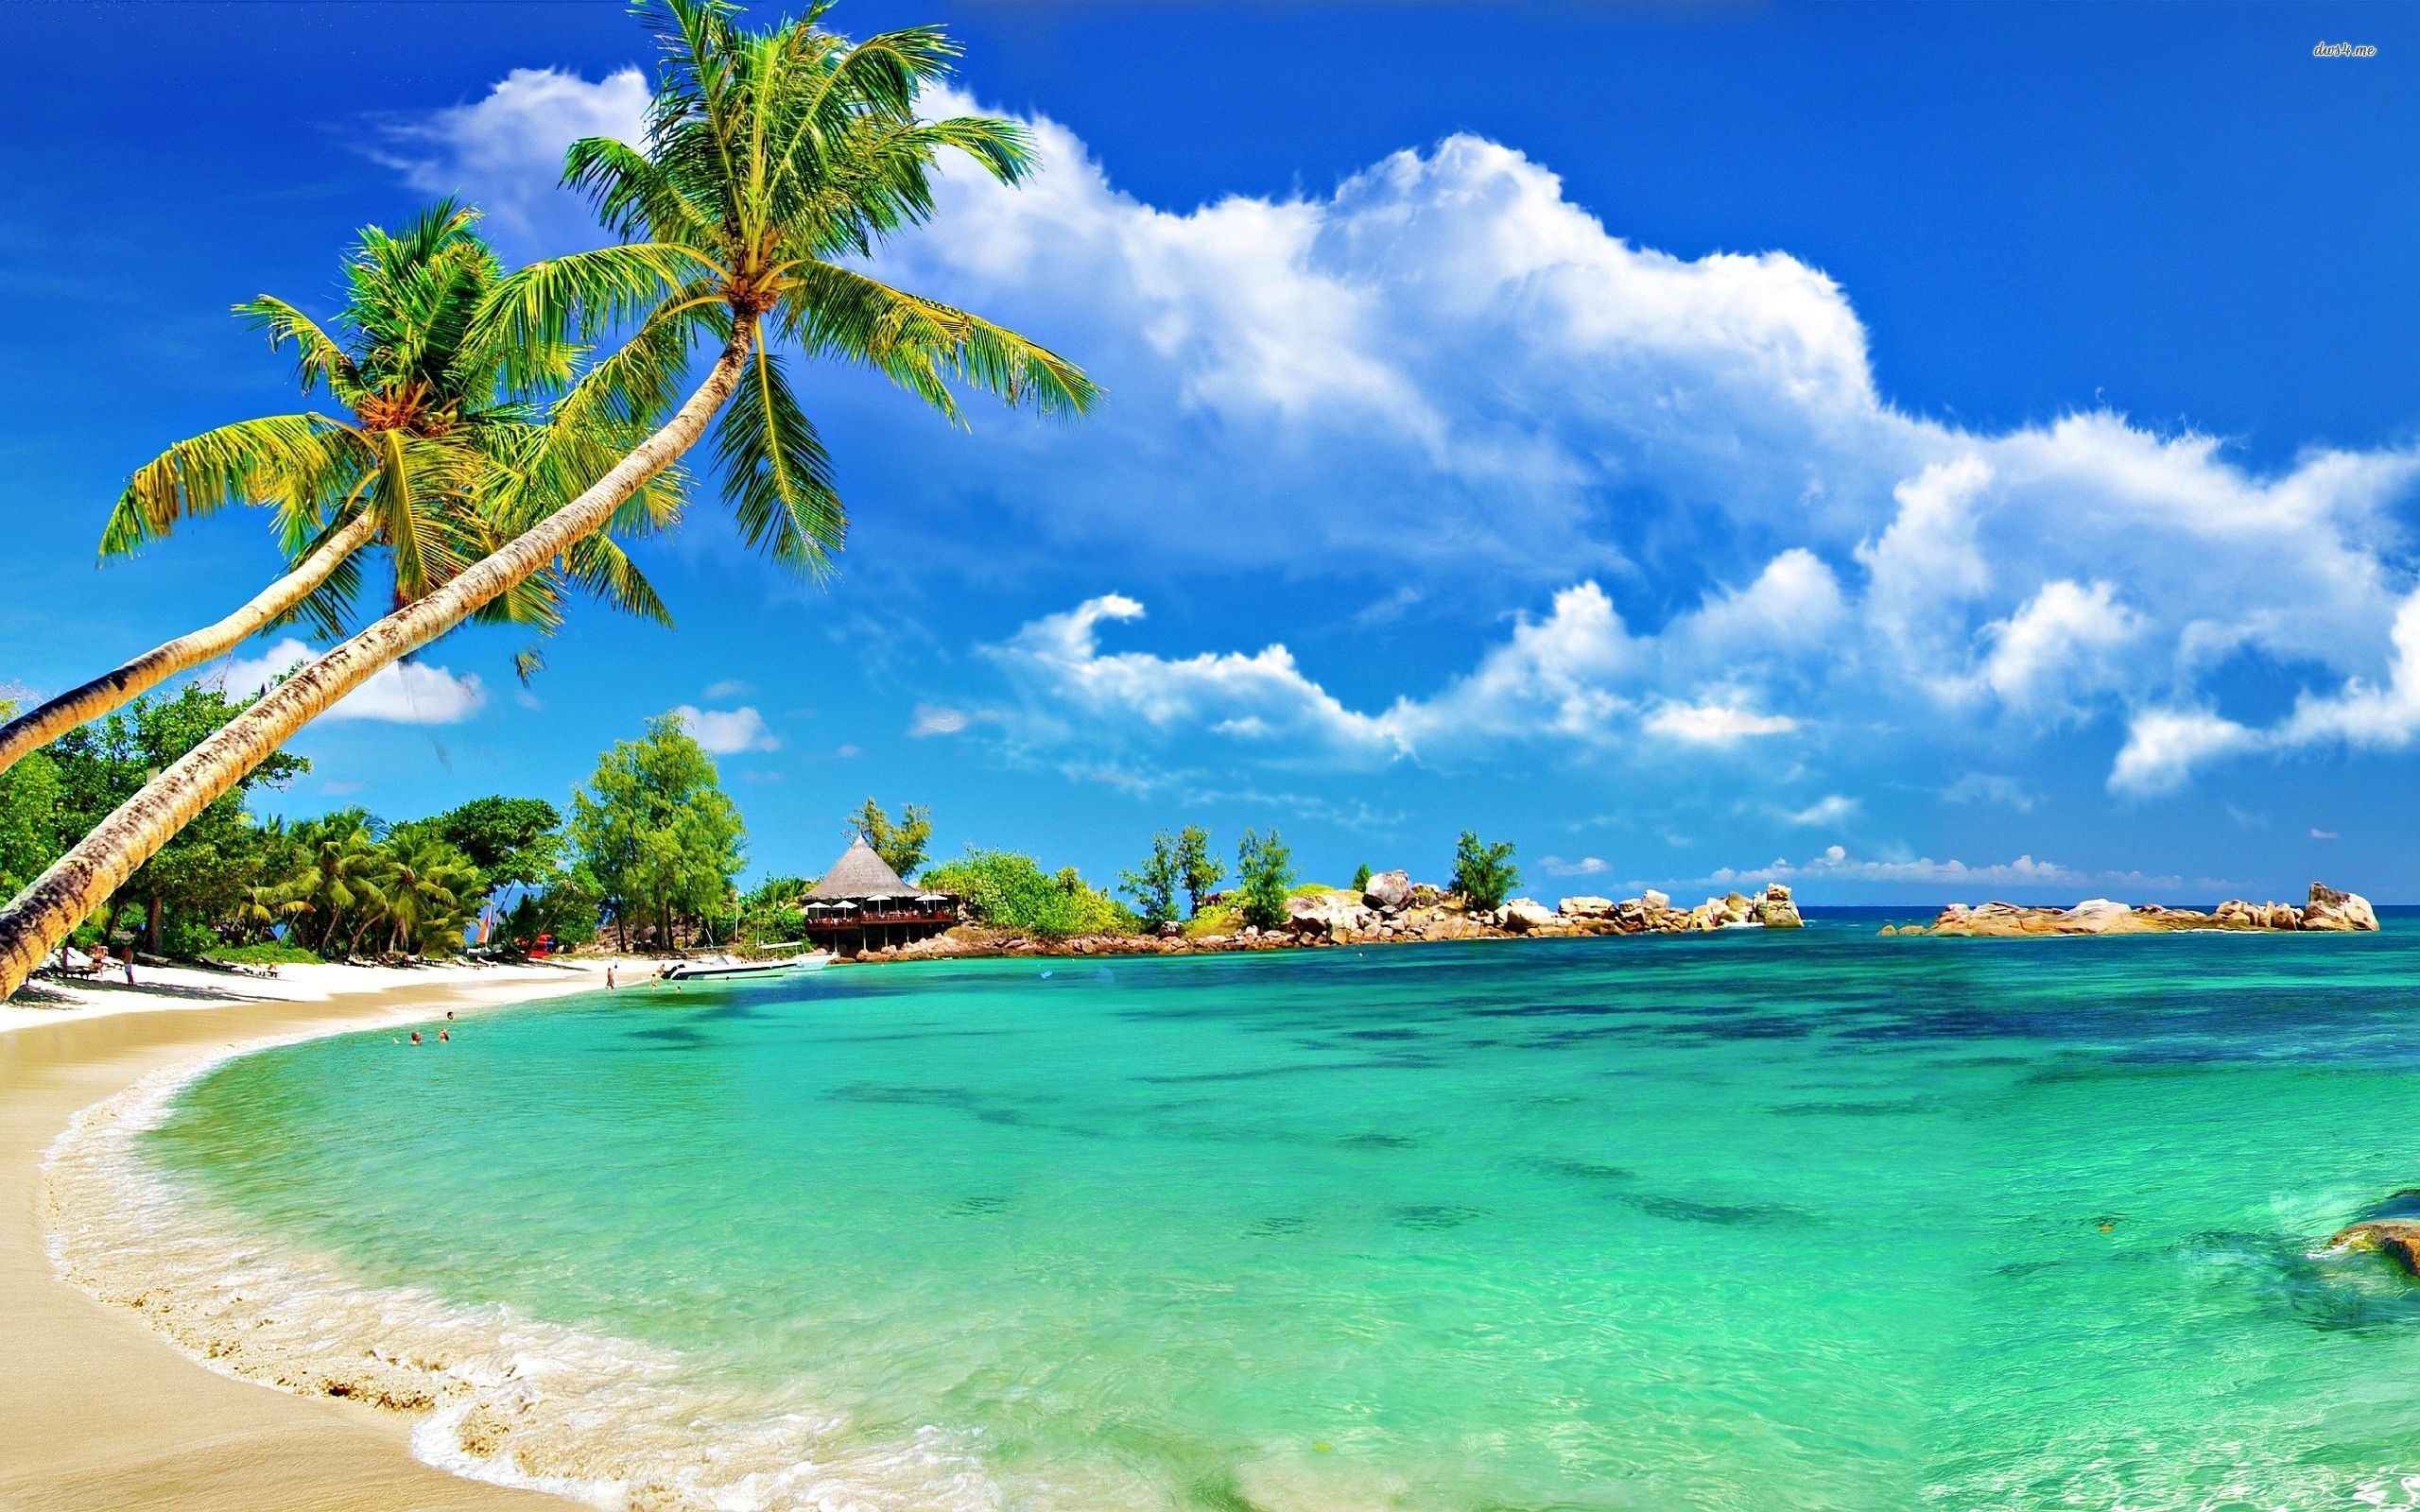 2560x1600 Tropical Beach Scenes Wallpapers Top Free Tropical Beach Scenes Backgrounds